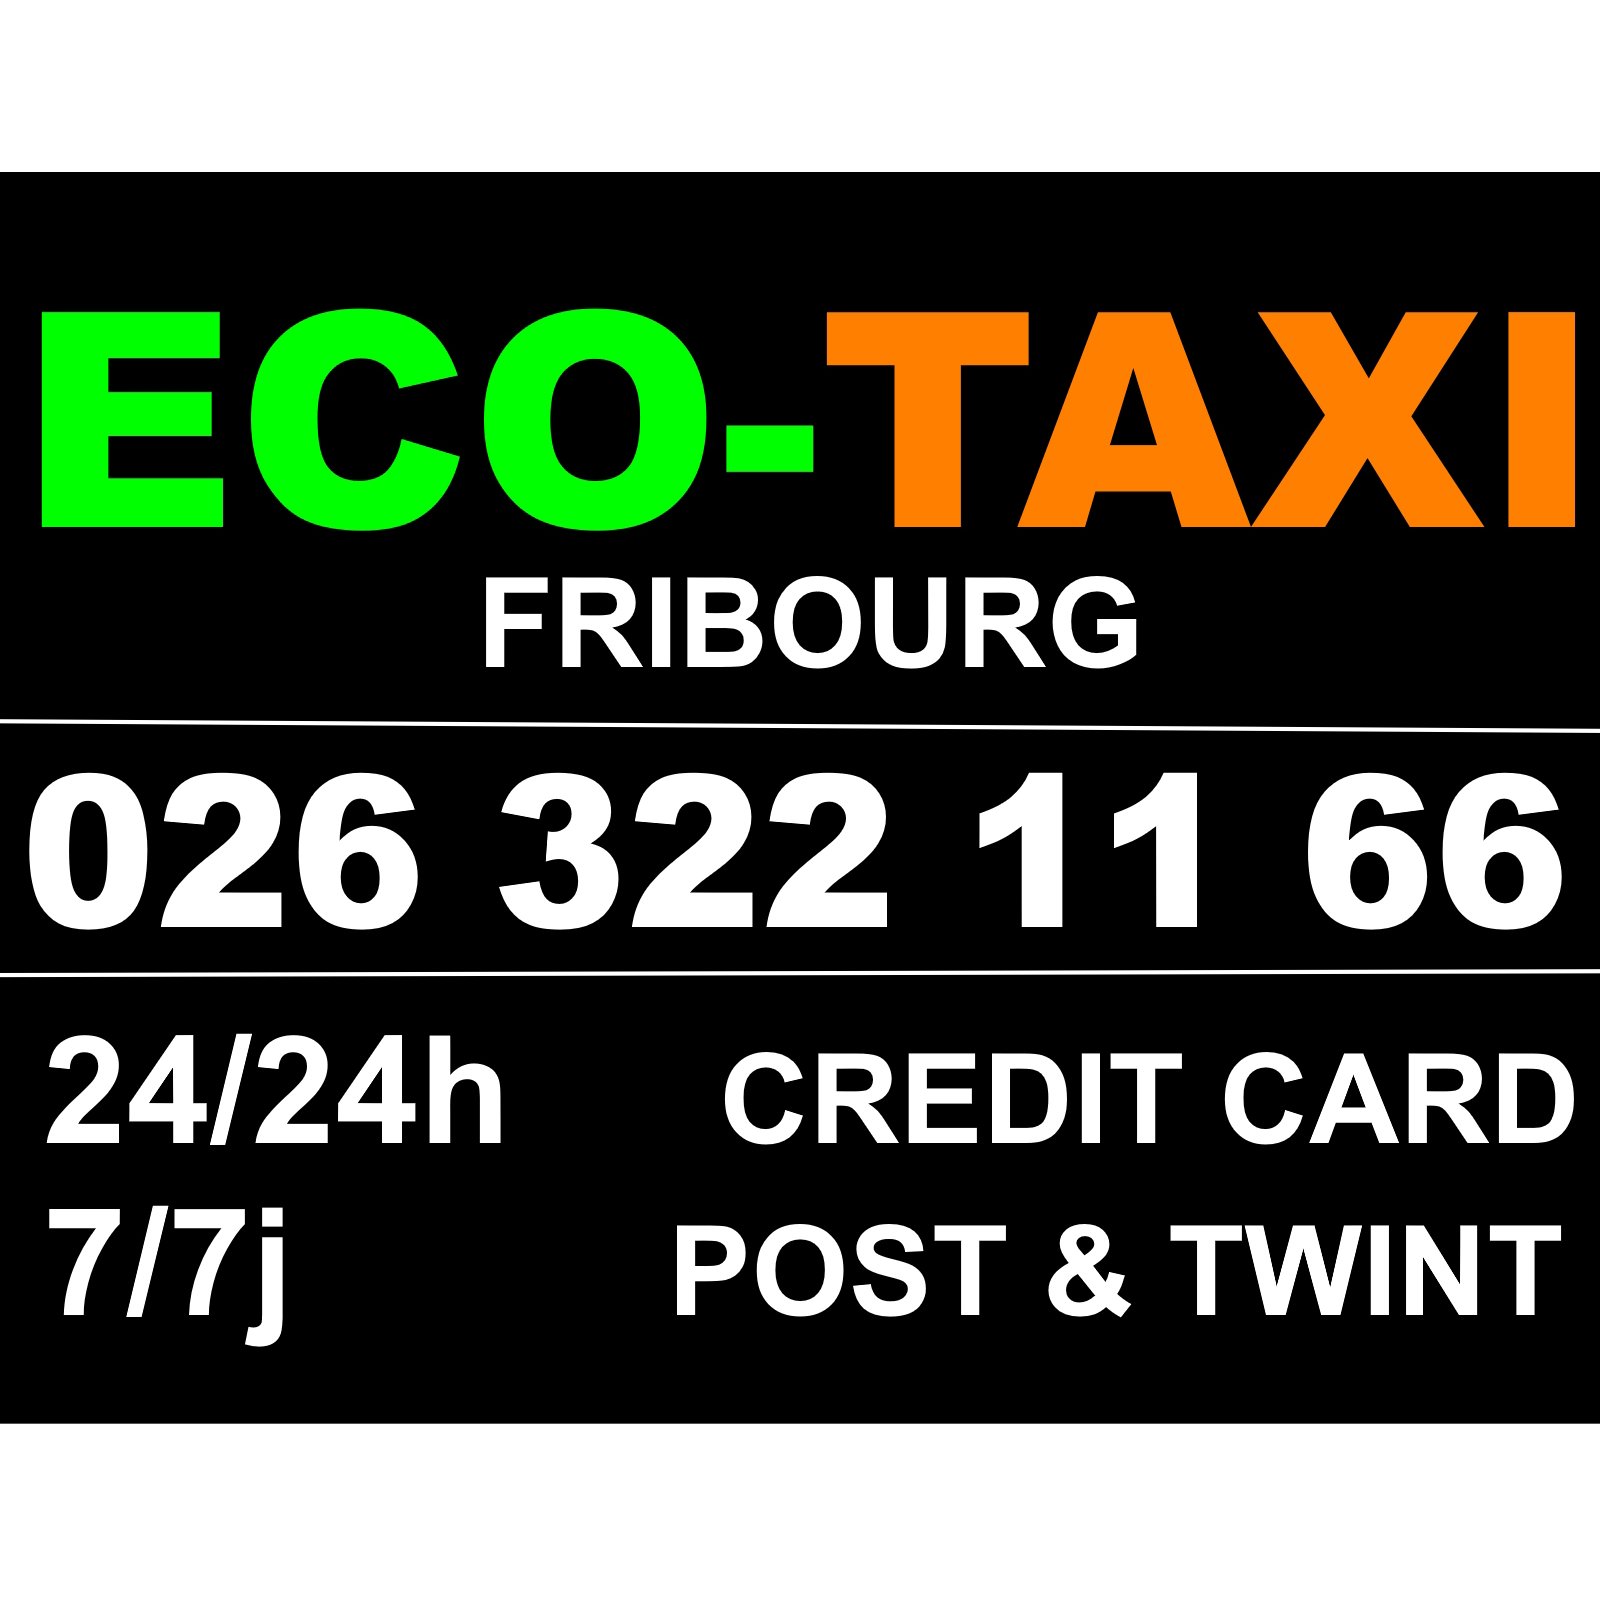 ECO-TAXI Fribourg - Taxi Service - Fribourg - 026 322 11 66 Switzerland | ShowMeLocal.com